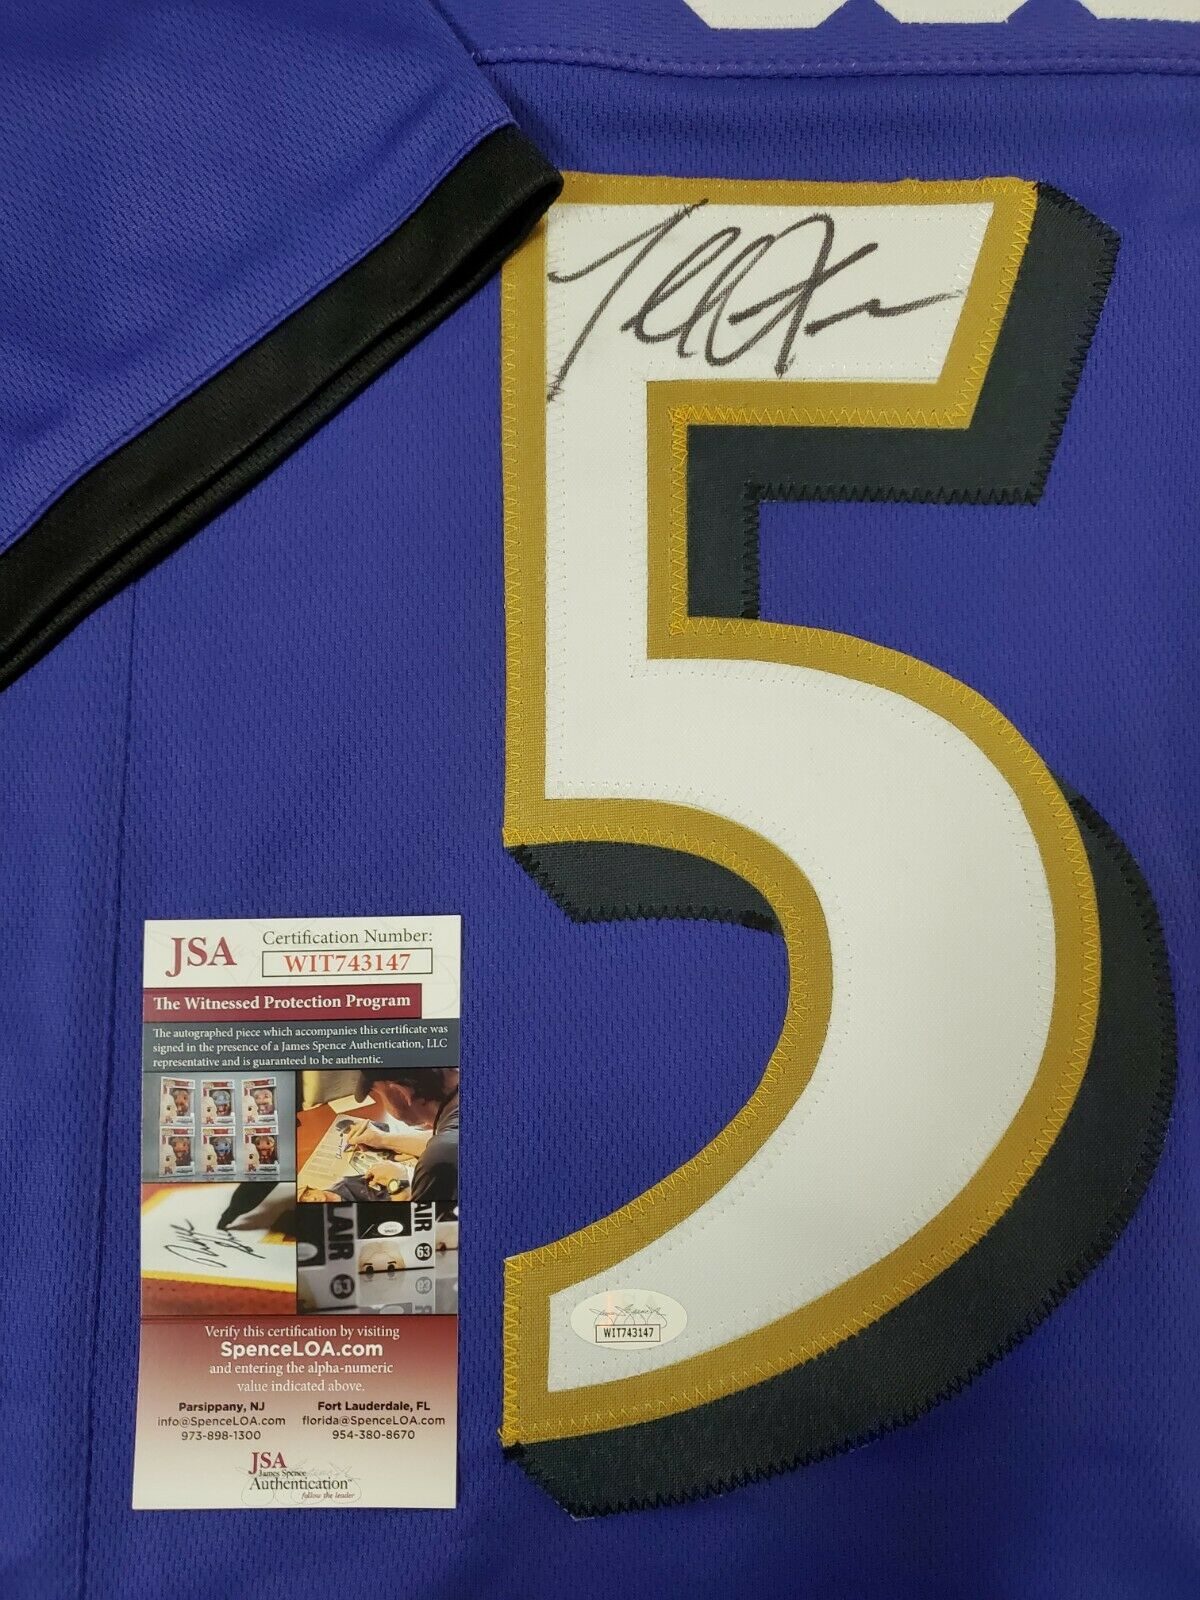 MVP Authentics Baltimore Ravens Terrell Suggs Autographed Signed Jersey Jsa Coa 152.10 sports jersey framing , jersey framing